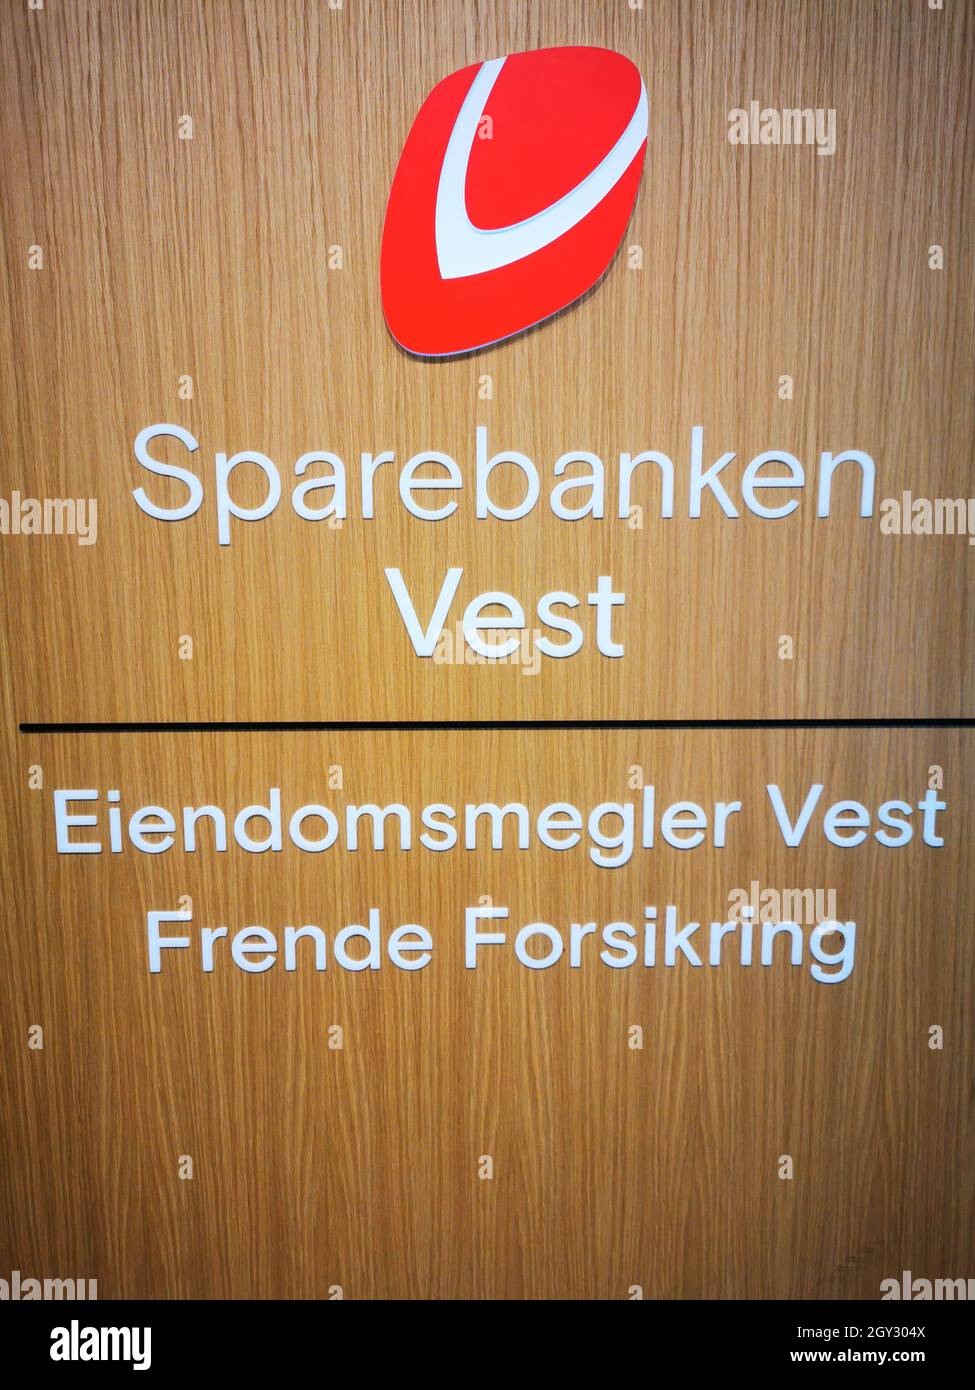 Sparebanken High Resolution Stock Photography and Images - Alamy